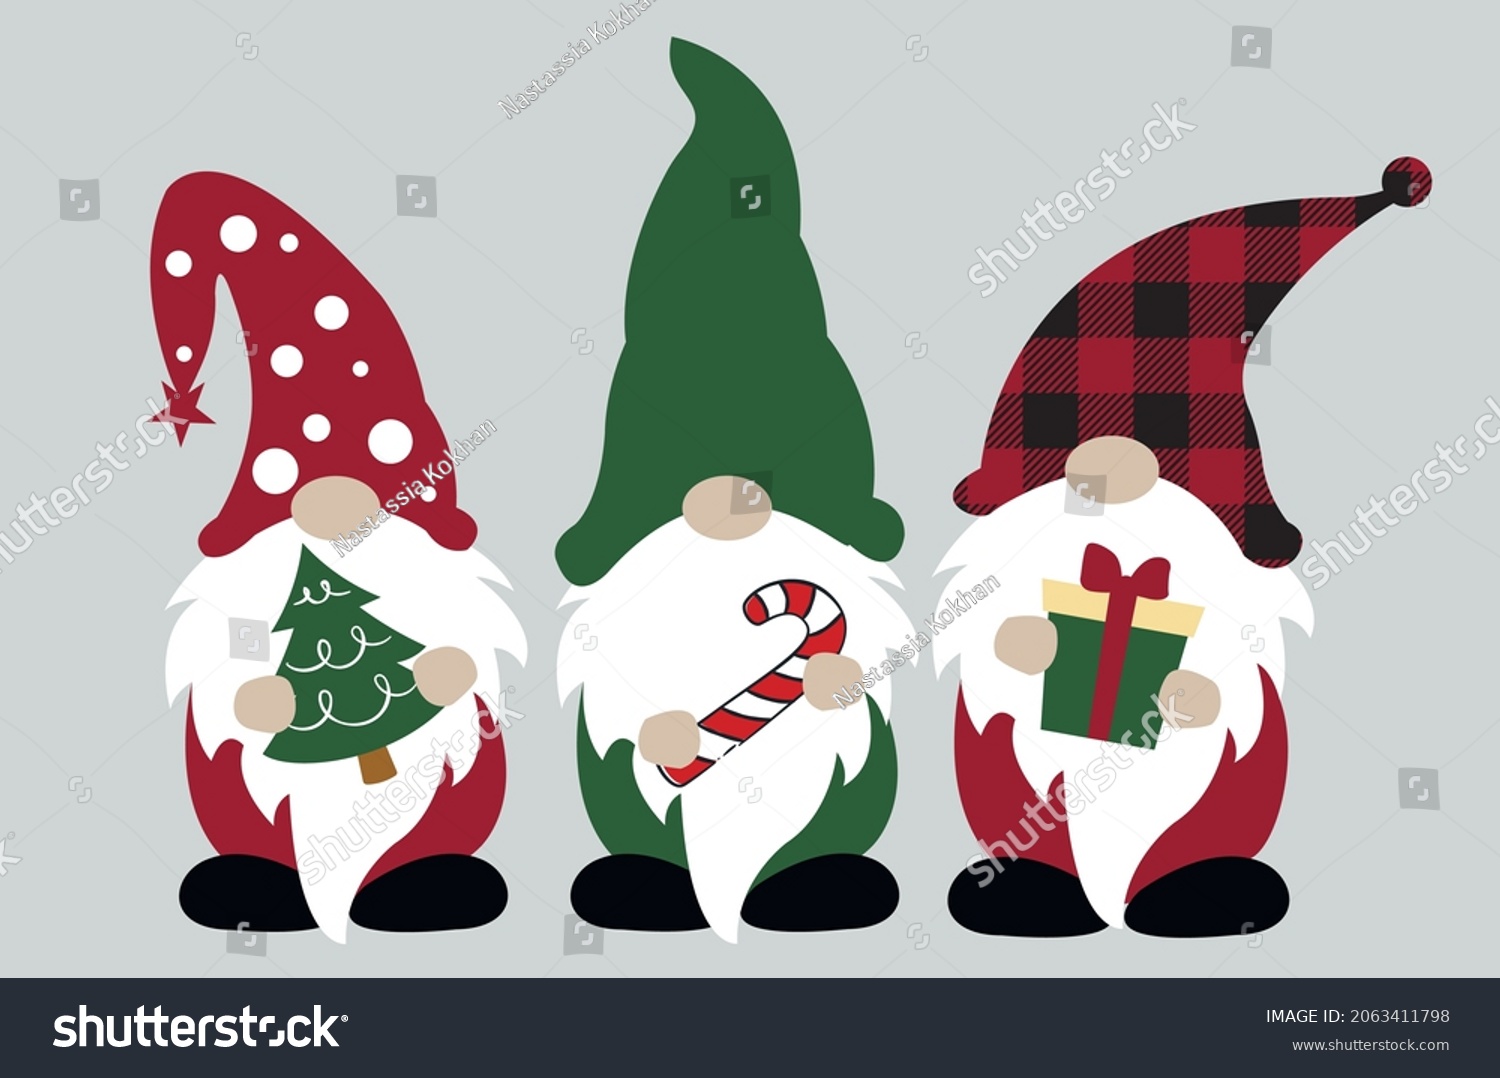 SVG of Christmas gnome svg vector Illustration. Three gnomes are holding new year items. Cute christmas gnome shirt design and home decor for winter vacation.Scandinavian gnome with decoration in hands  svg